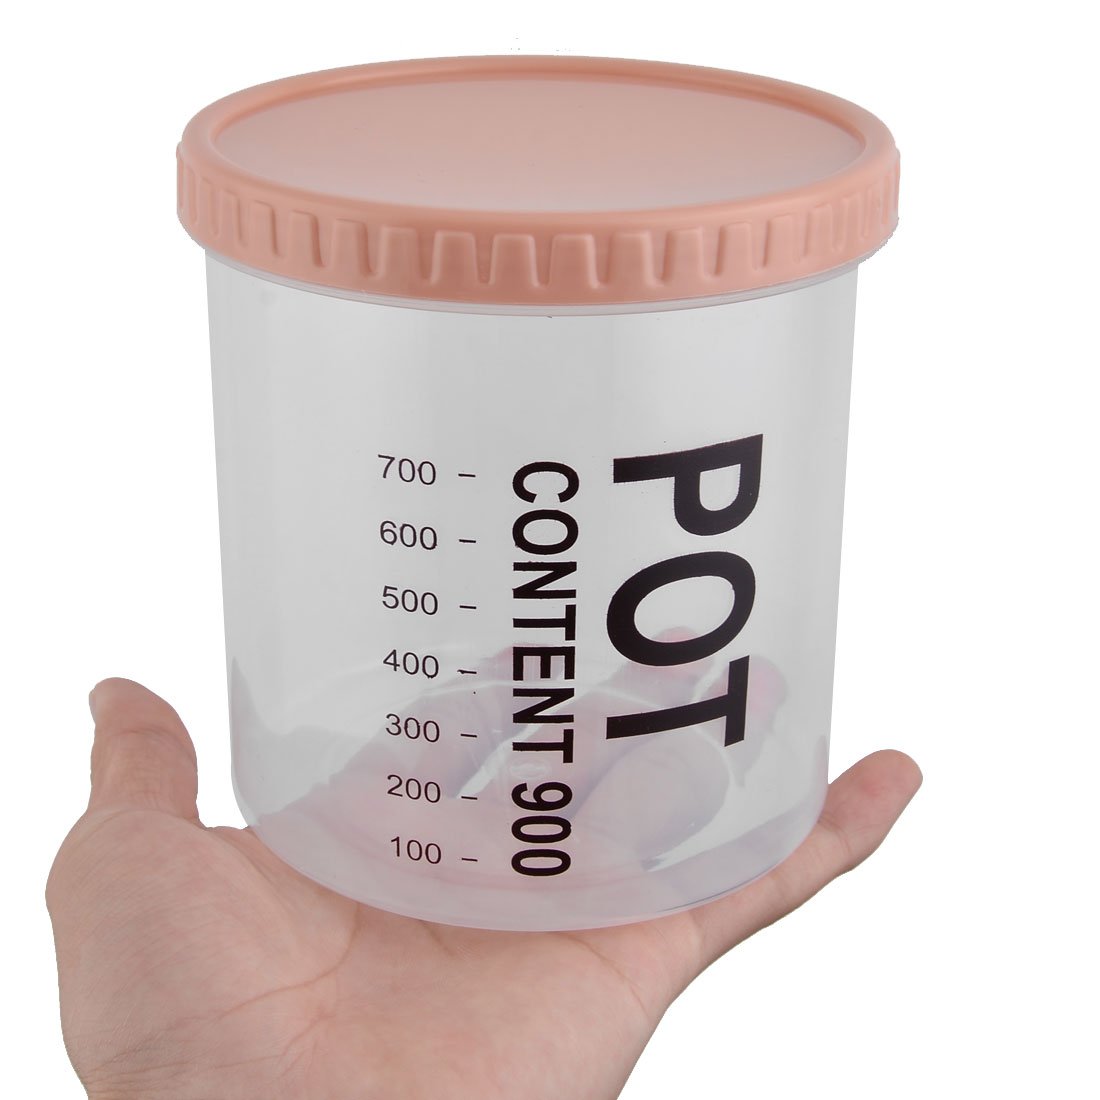 Qtqgoitem Plastic Household Round Design Food Cereal Soybean Storage Container Light Pink (model: 2a7 46a 00c 597 95c)